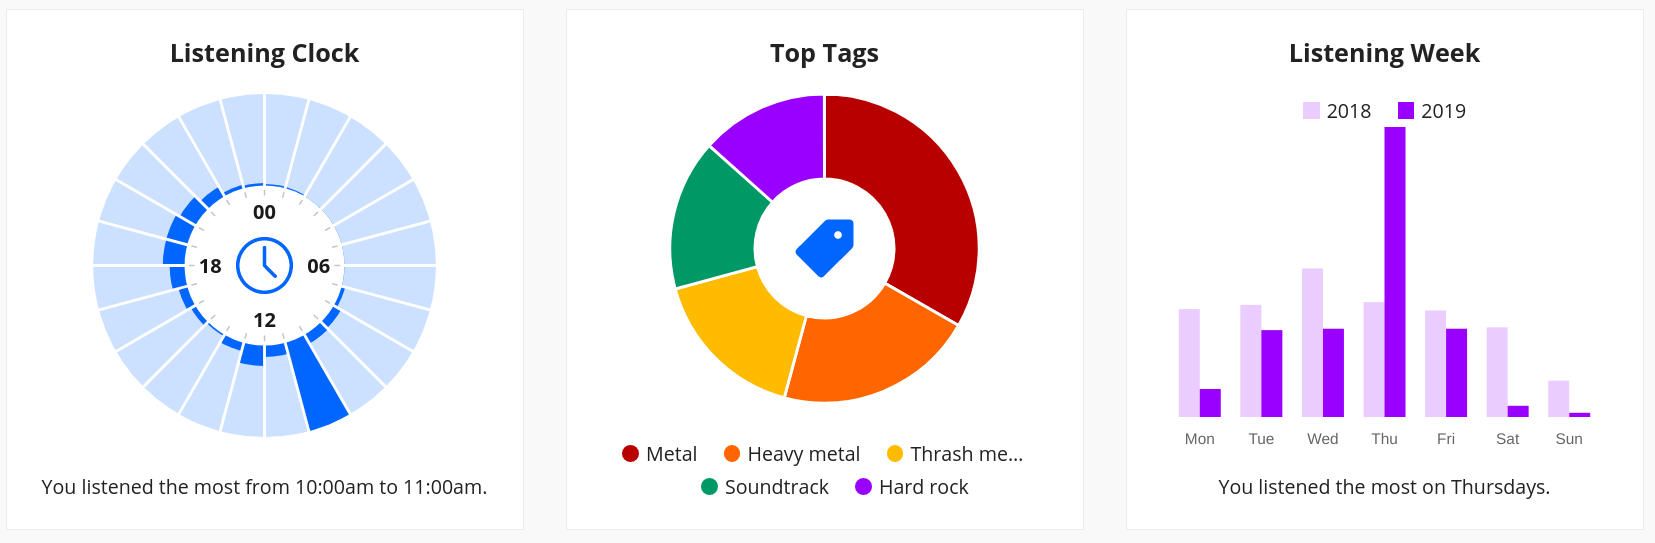 6 different charts with the data. Listening time, top tags, listening week, artists, albums, and tracks